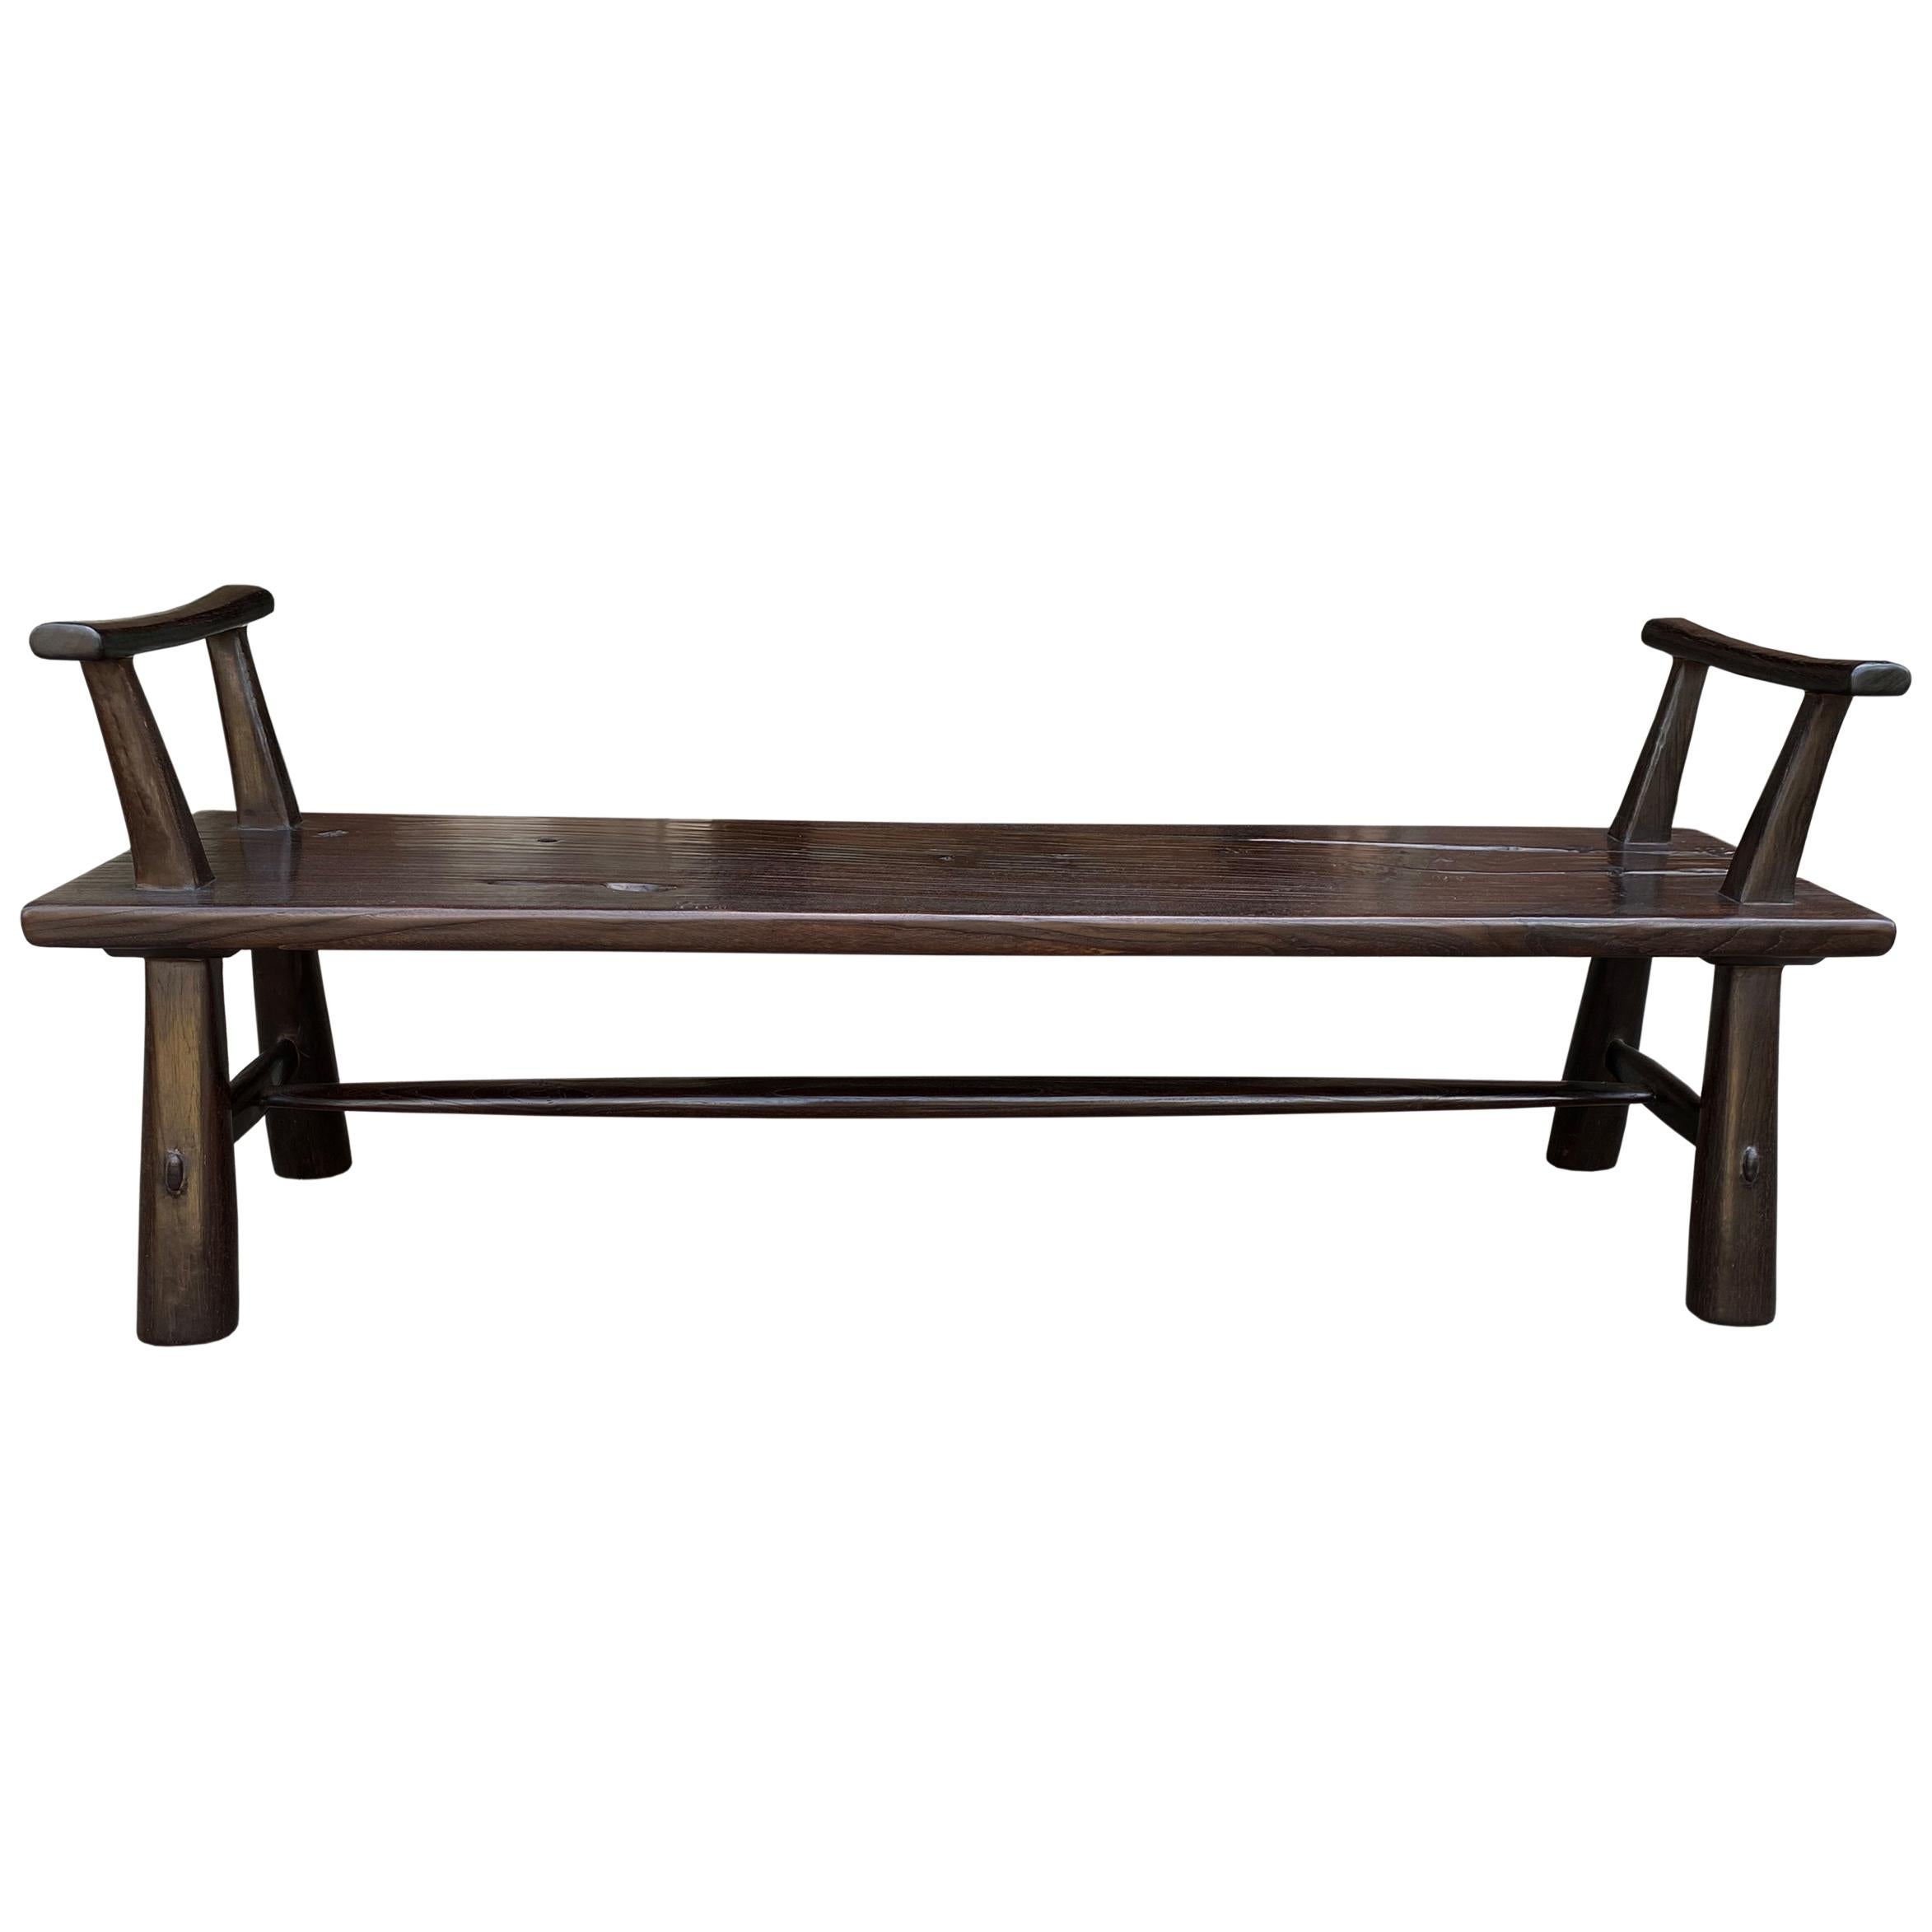 Andrianna Shamaris Midcentury Couture Espresso Stained Teak Bench with Arms For Sale